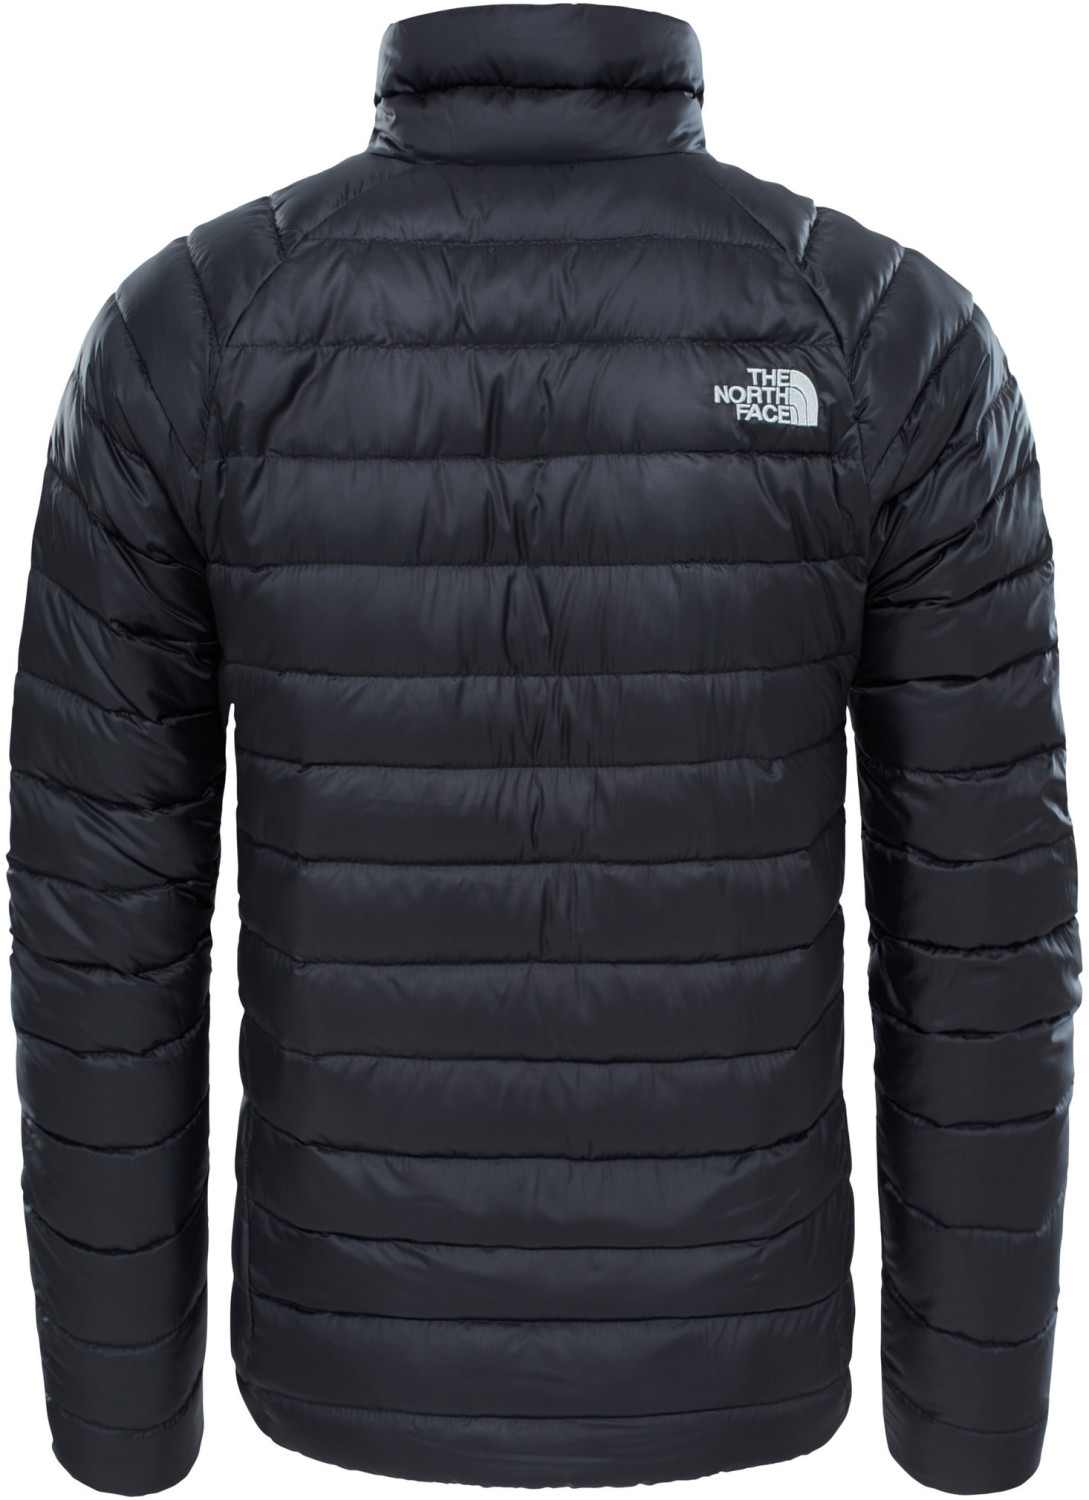 The North Face Trevail Jacket tnf black desde 155,90 € | Compara ...